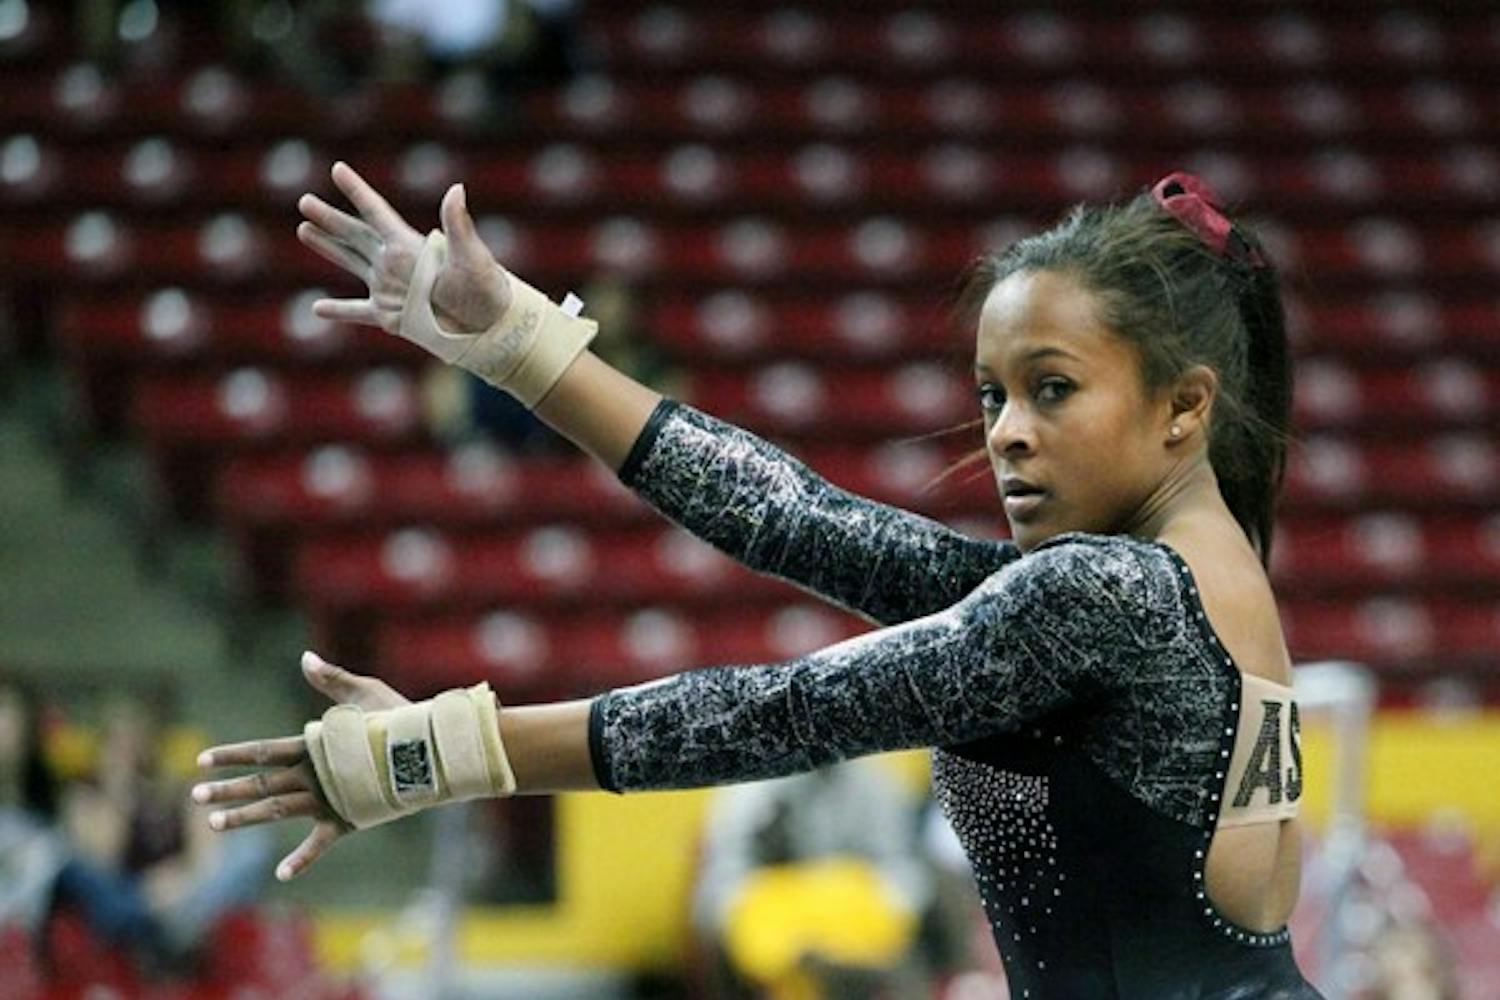 Beaté Jones performs a floor routine in a meet against Utah on Feb. 12. After redshirting her junior year, Jones is enjoying her final season in Tempe as the leader of the Gym Devils. (Photo by Beth Easterbrook)